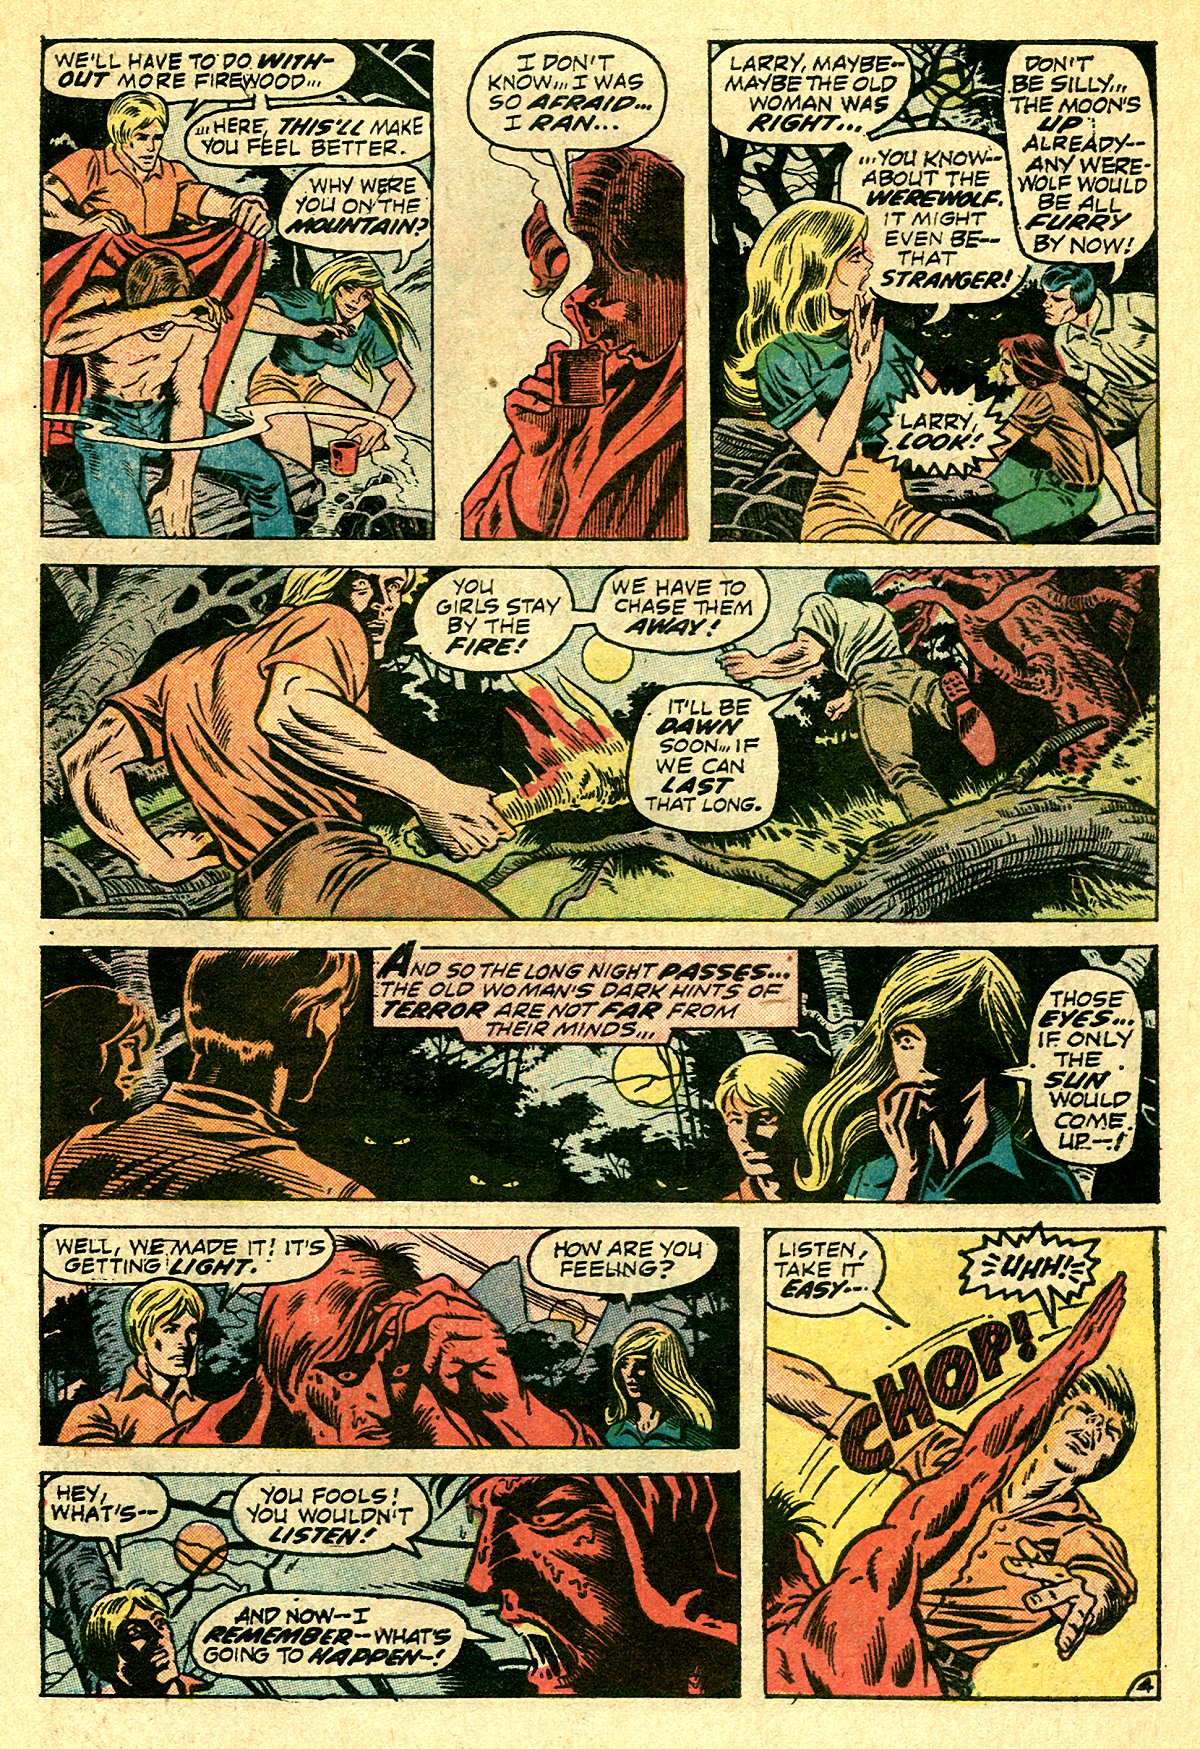 Chamber of Chills (1972) 1 Page 6